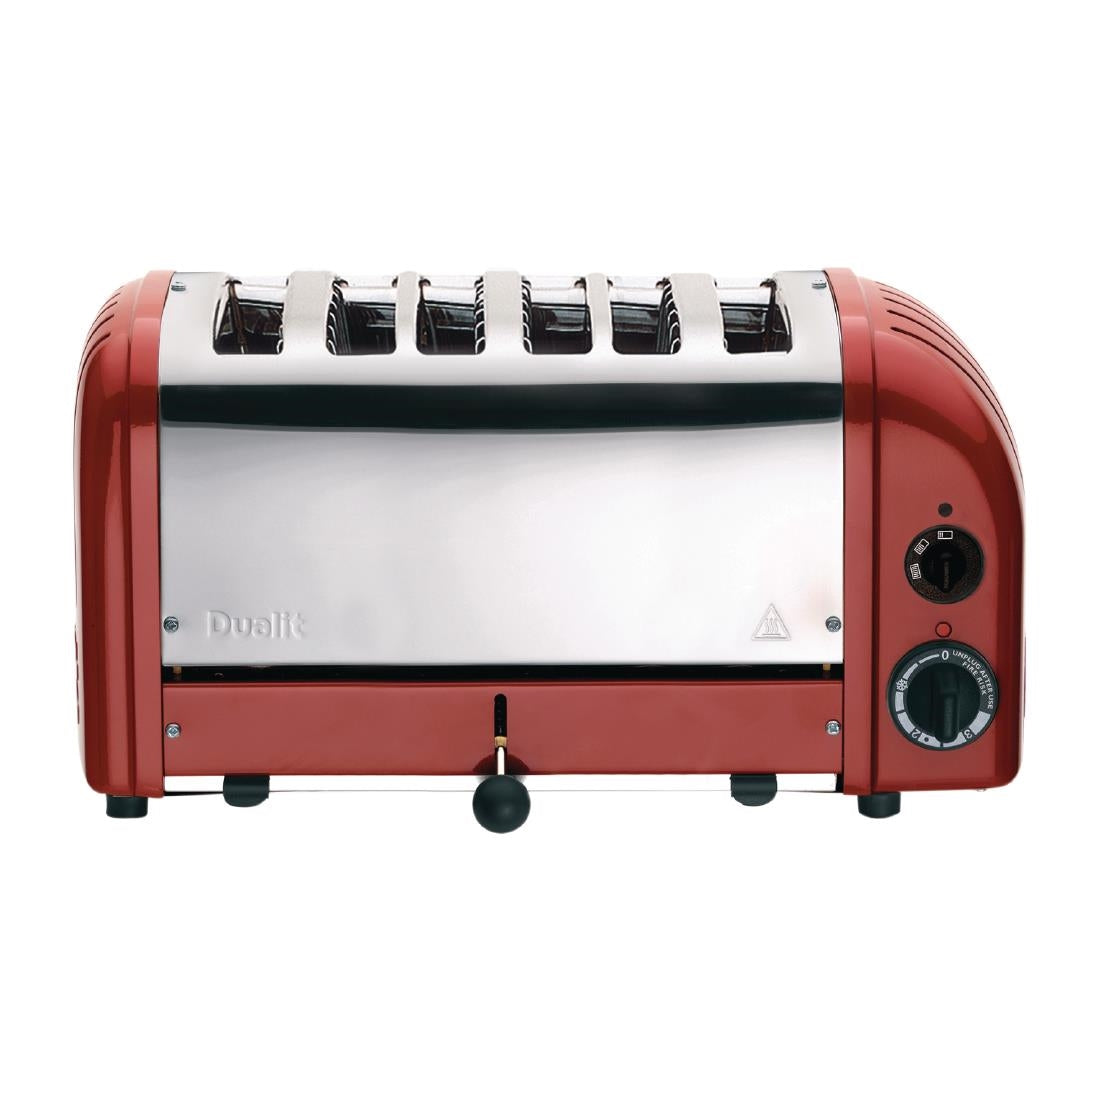 GD395 Dualit 6 Slice Vario Toaster Red 60154 JD Catering Equipment Solutions Ltd